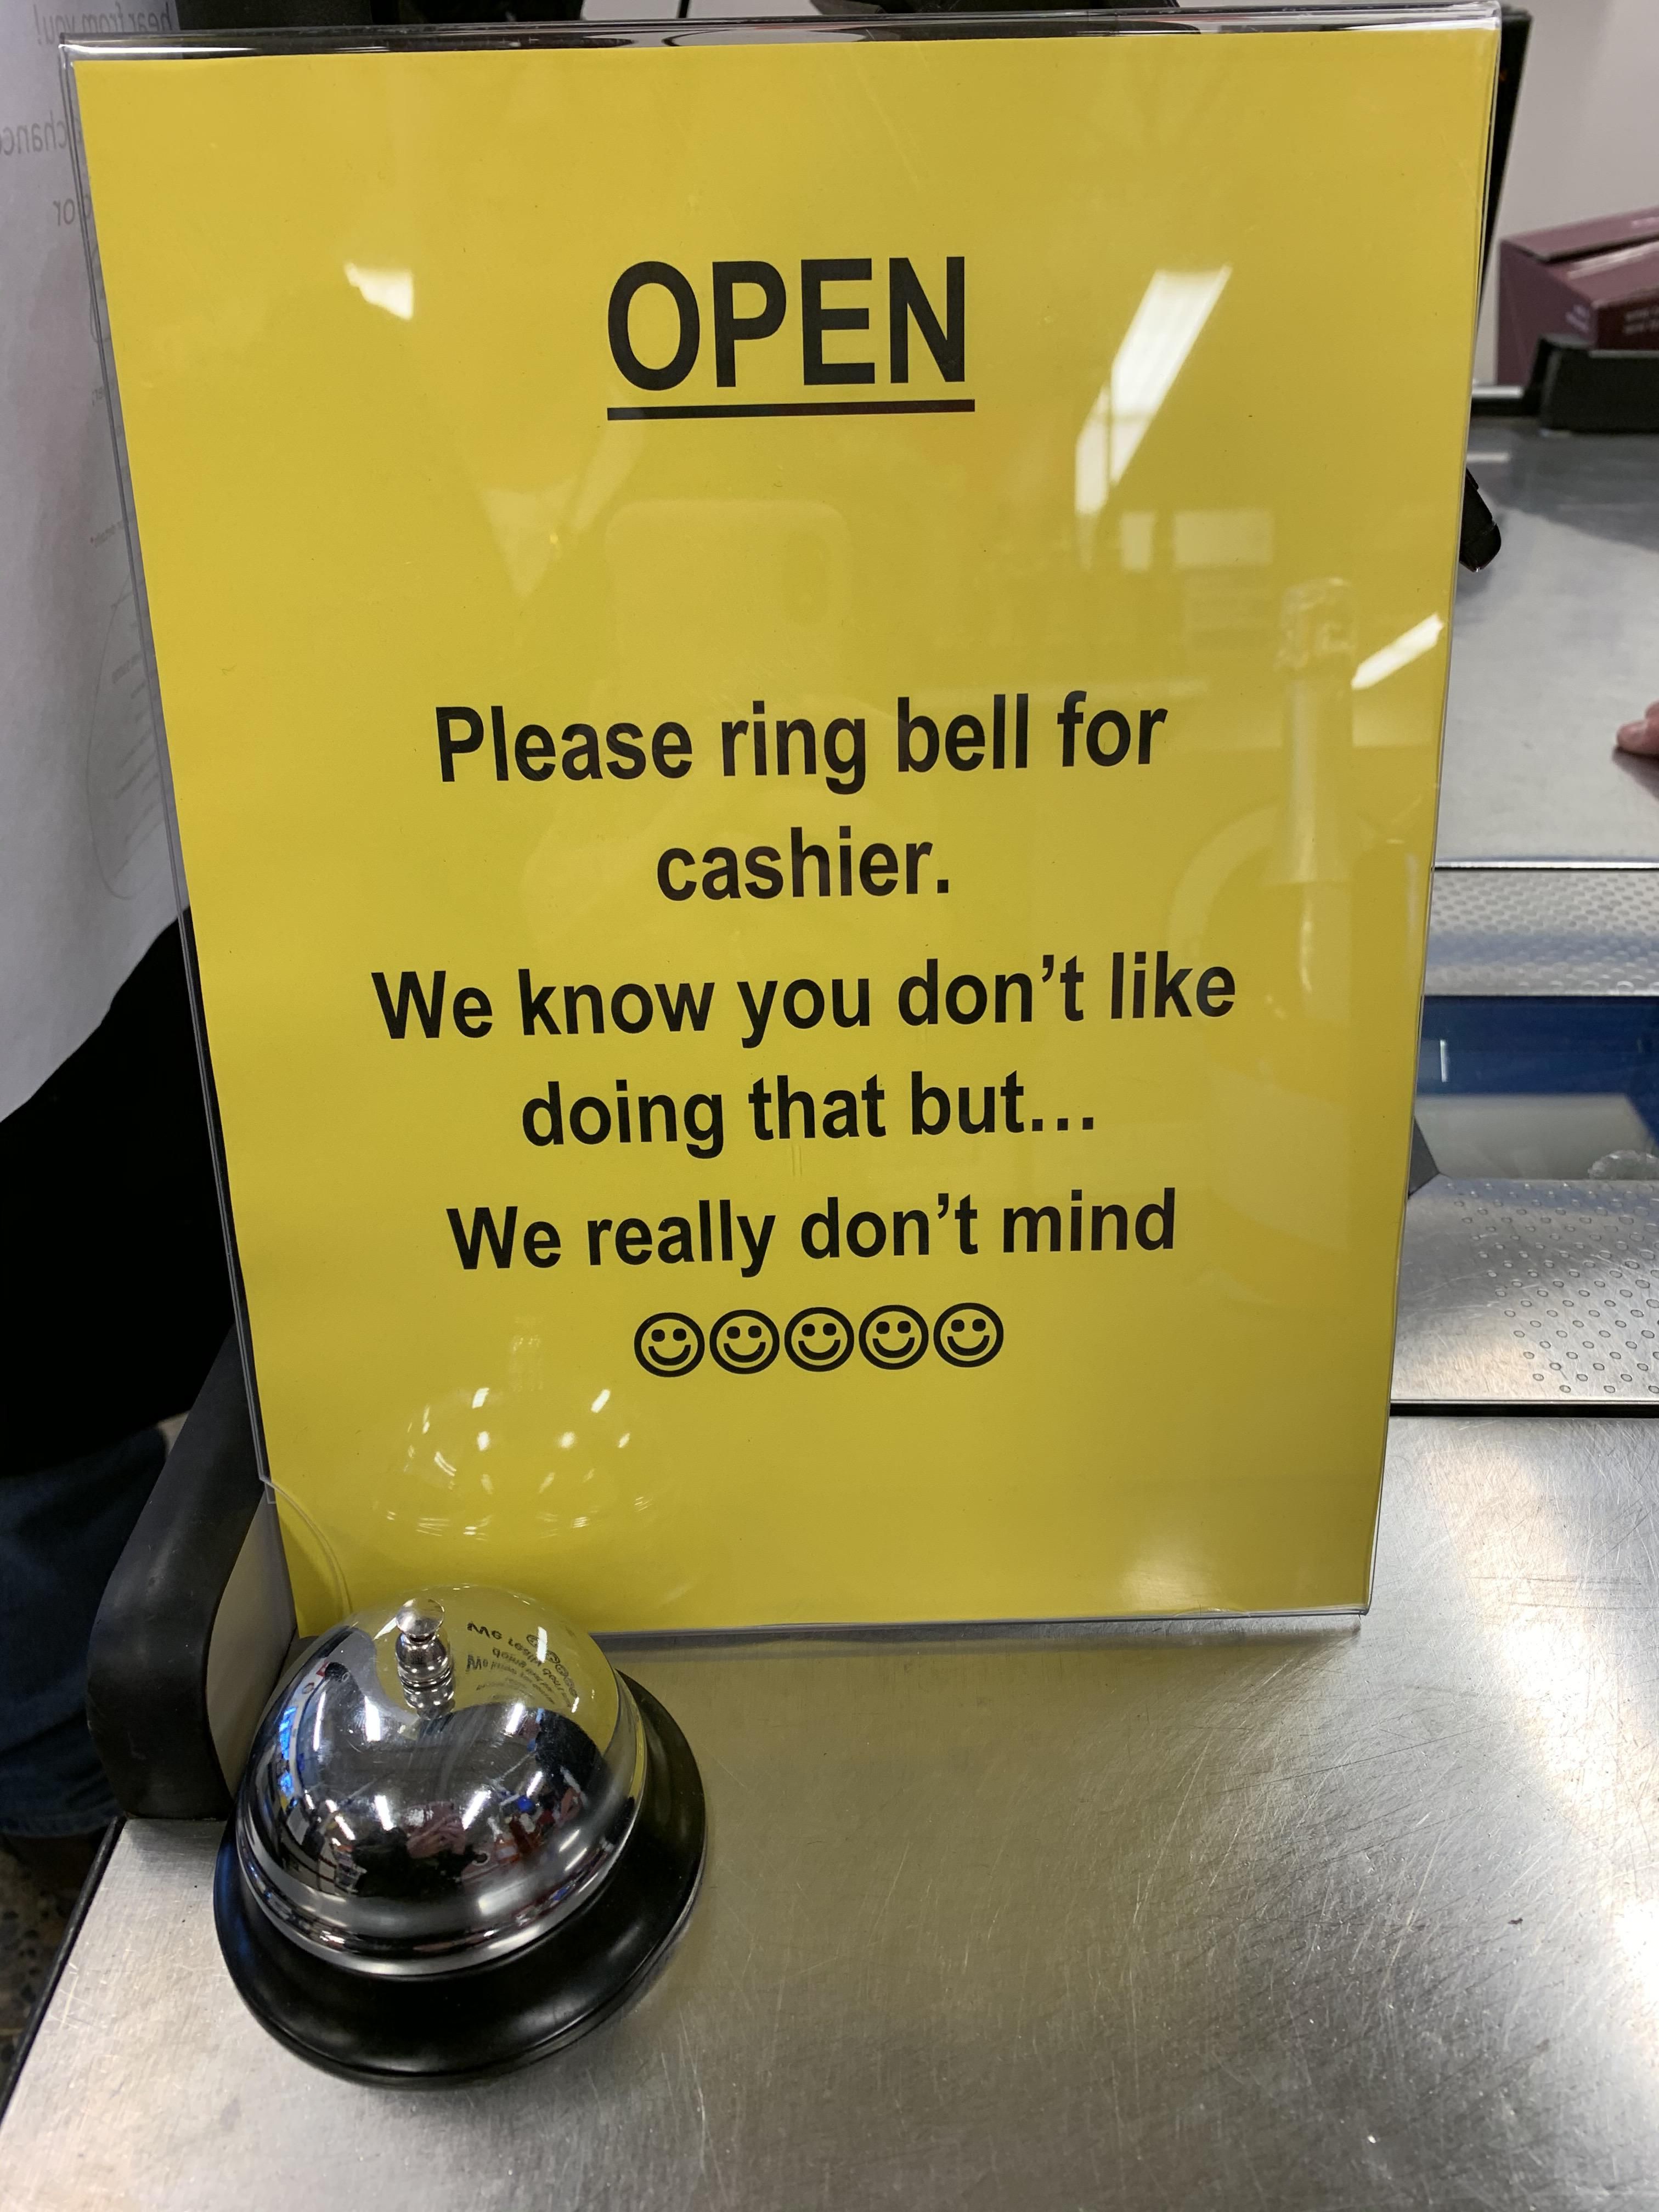 Politeness stand-off at Real Canadian Superstore